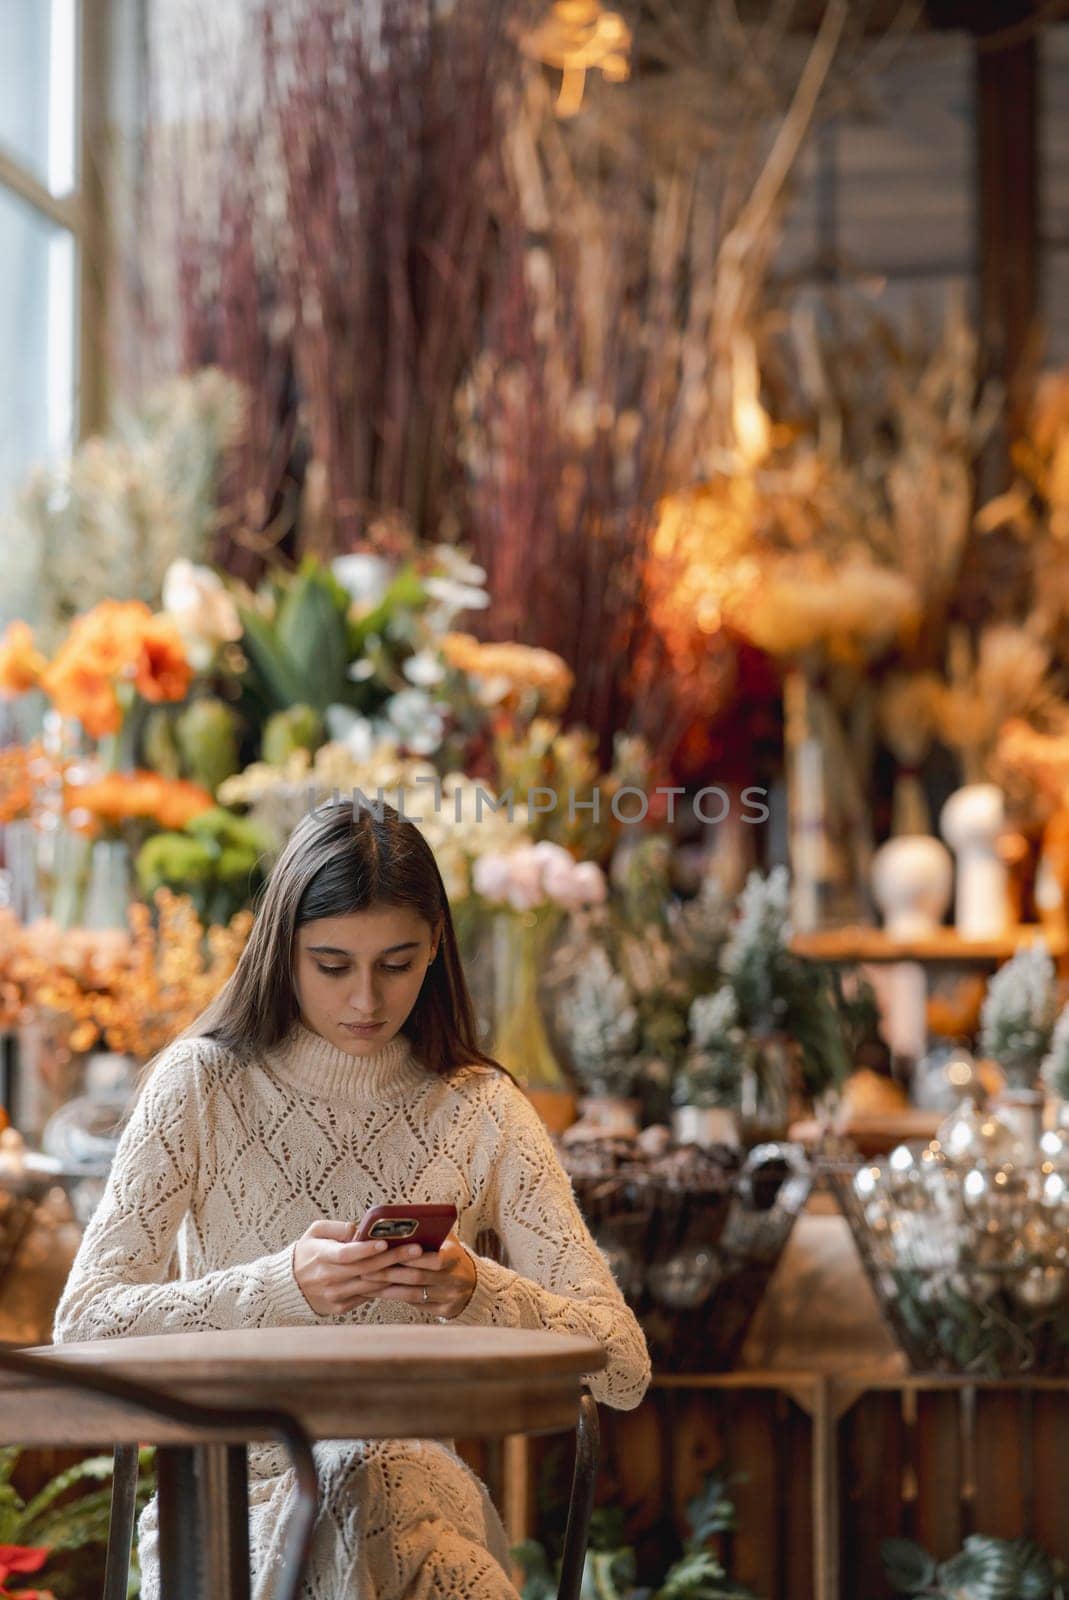 An elegant, bright girl browsing through Christmas decor while using her smartphone. High quality photo